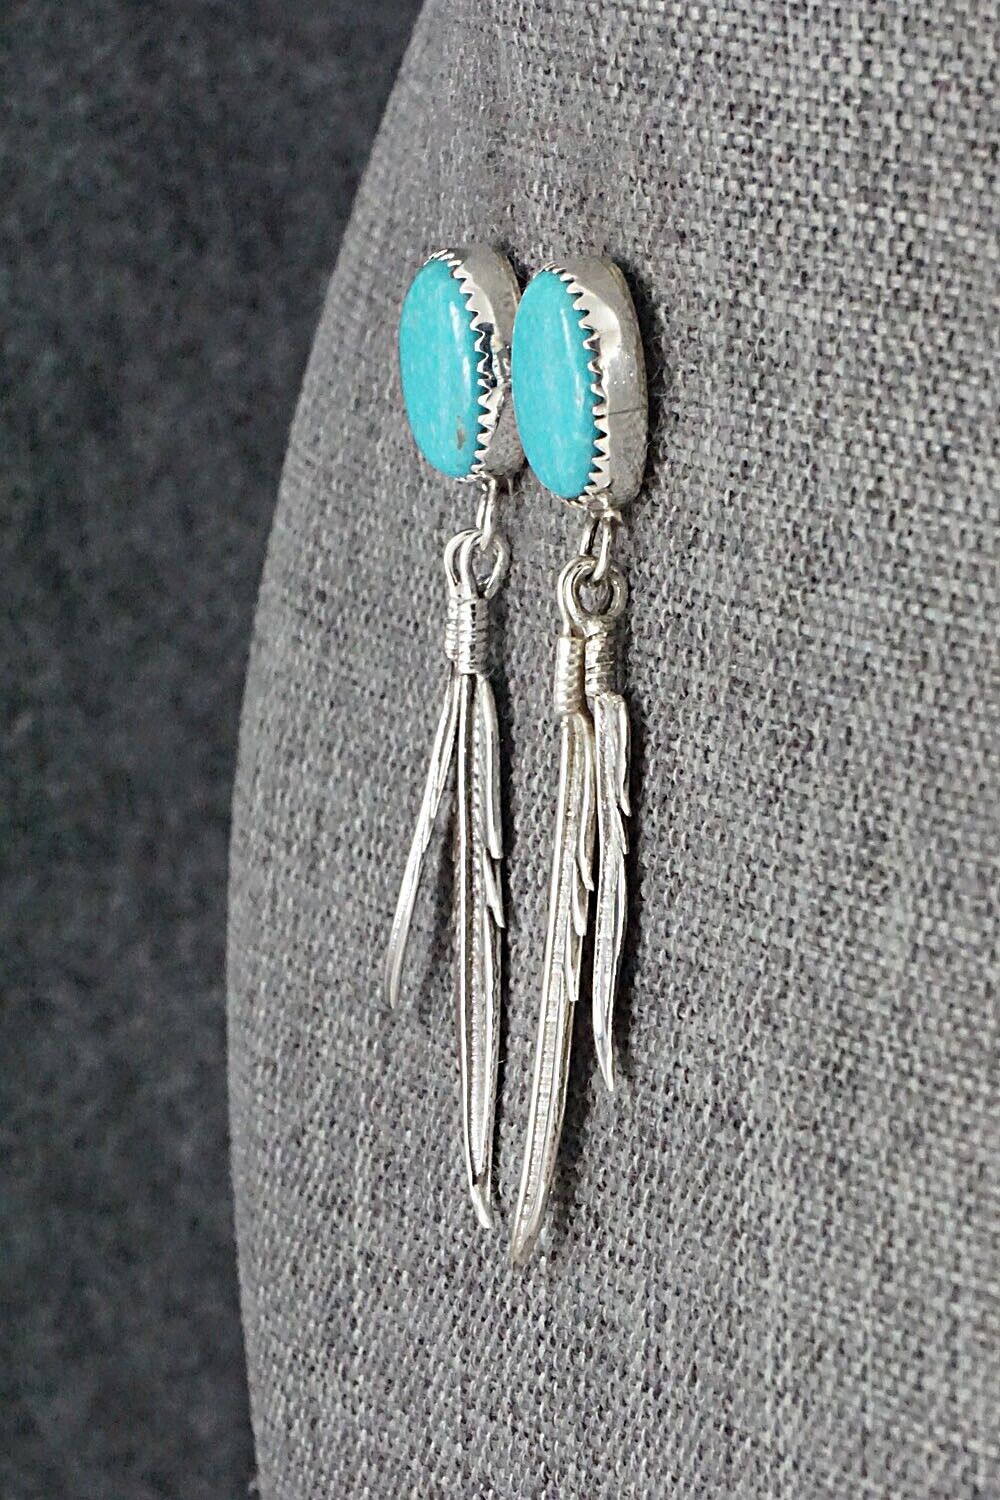 Turquoise & Sterling Silver Earrings - Letricia Largo